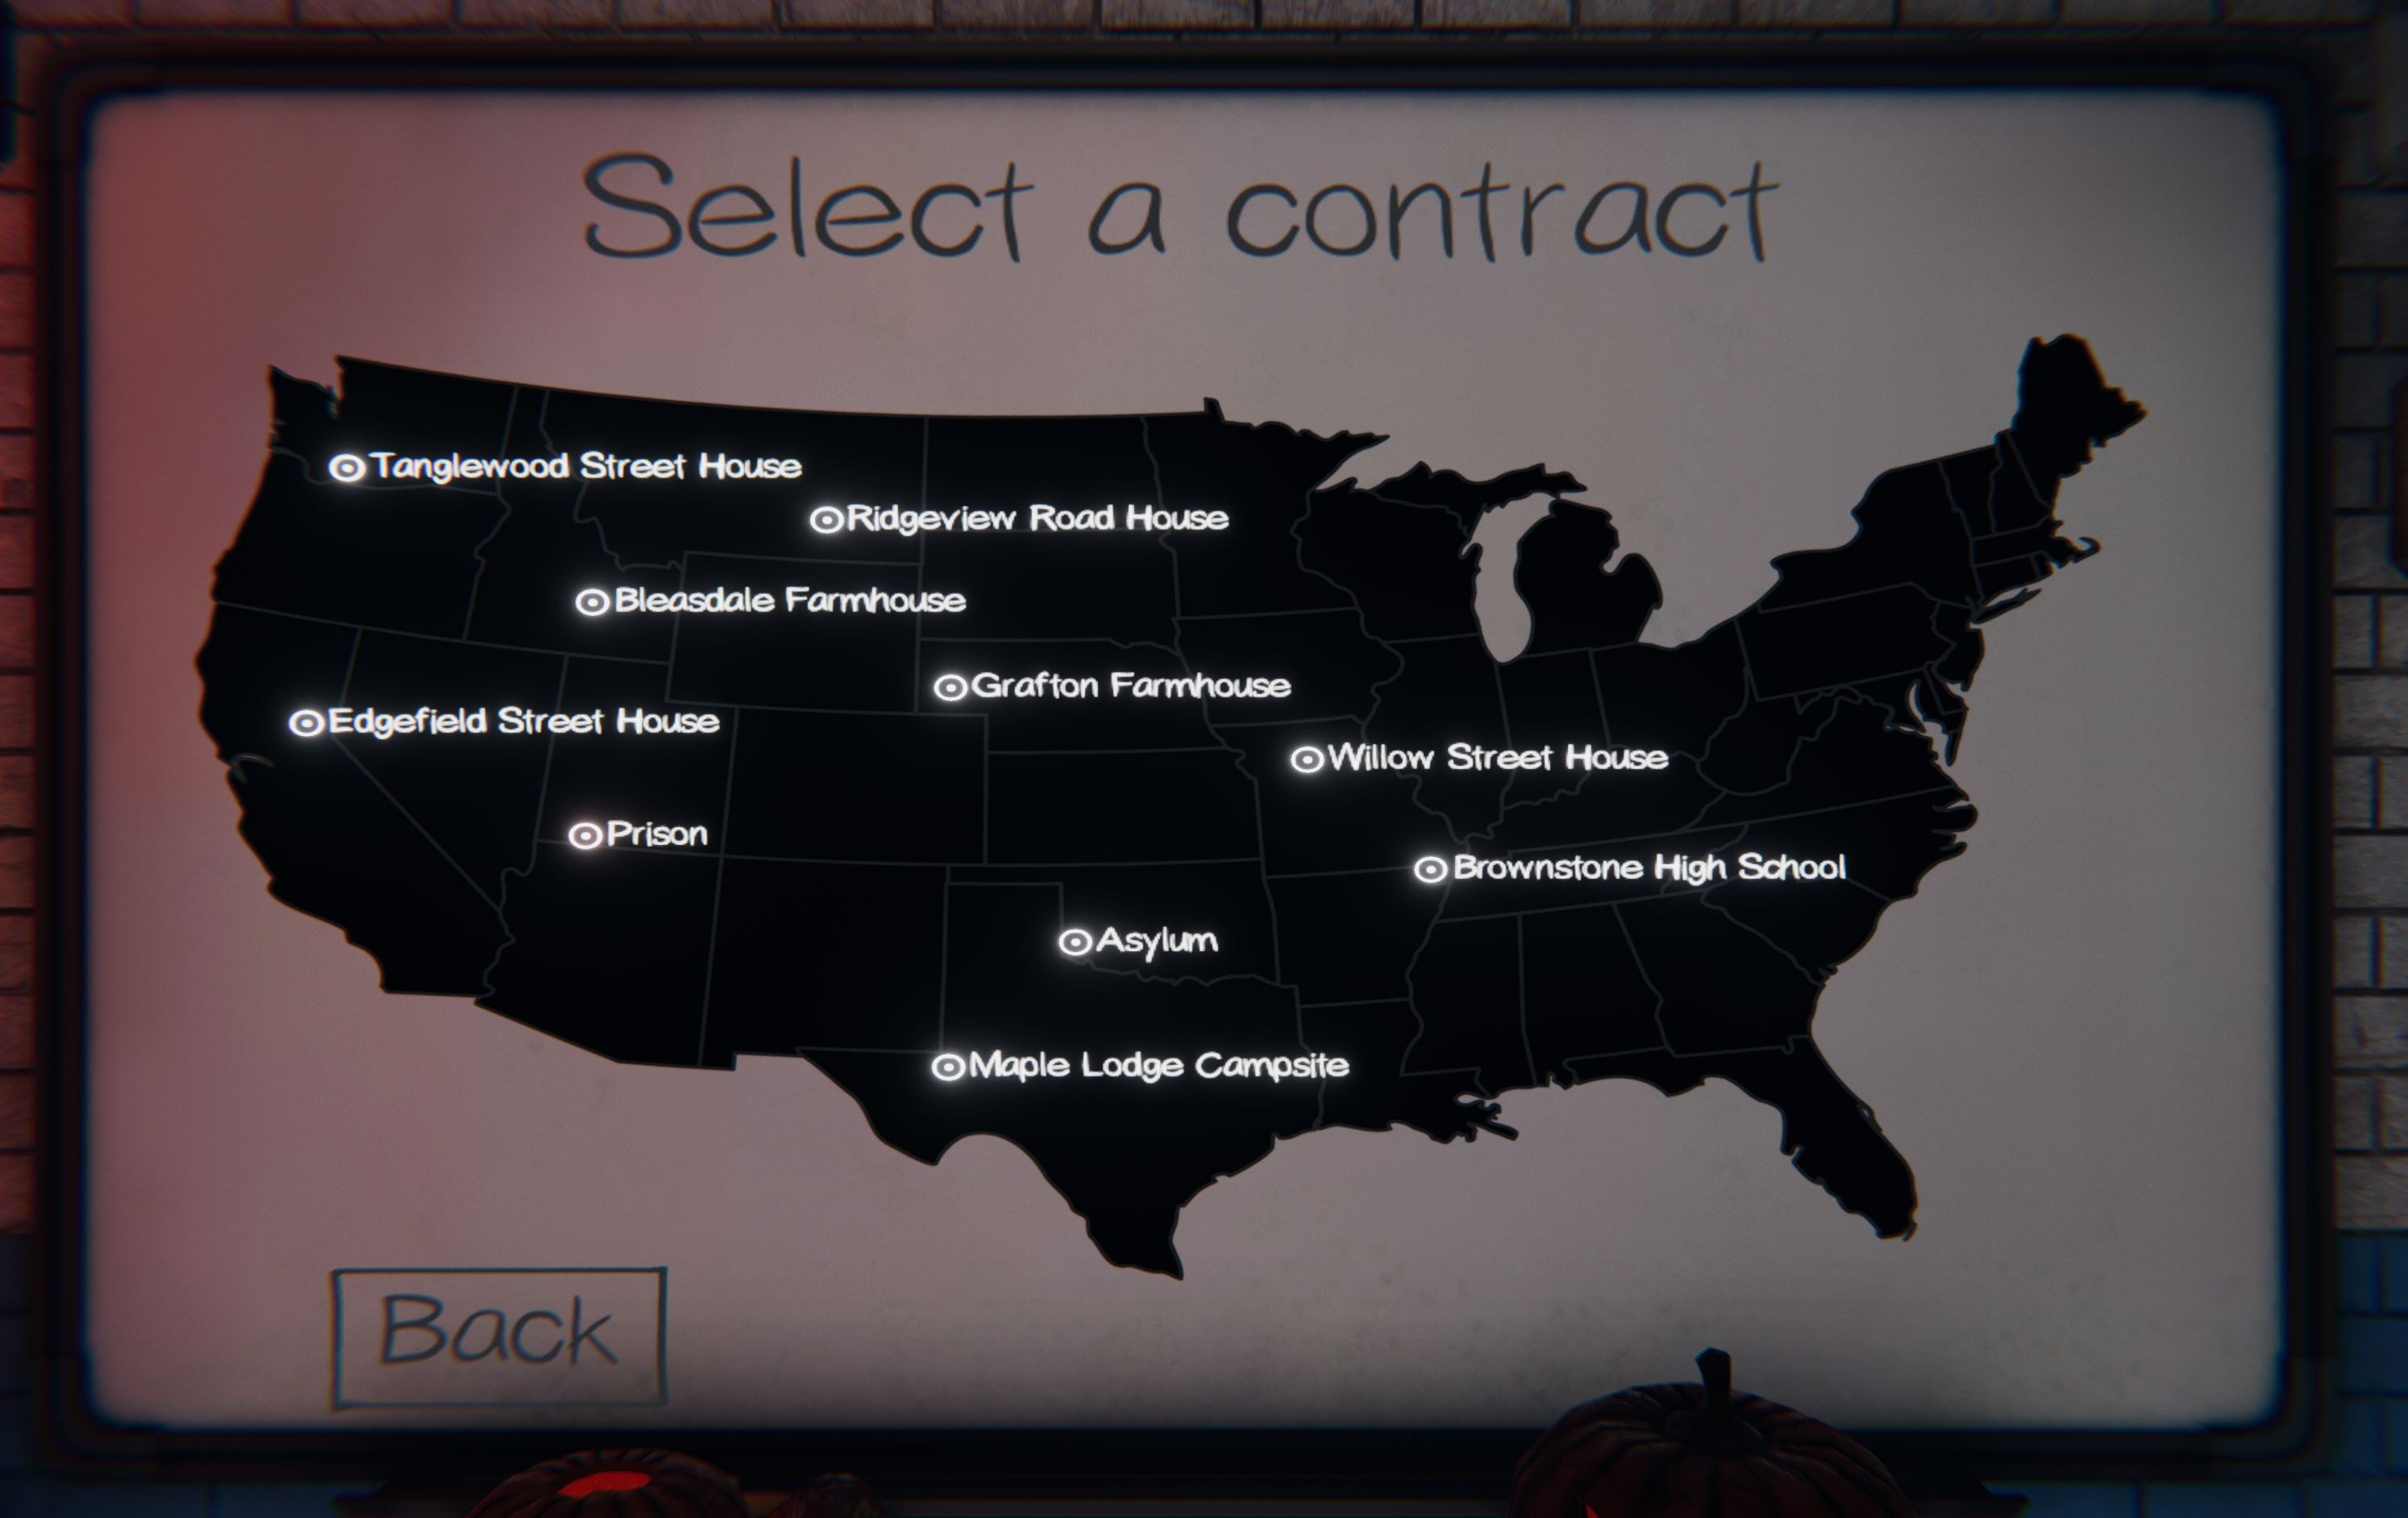 Contract_Map.JPG